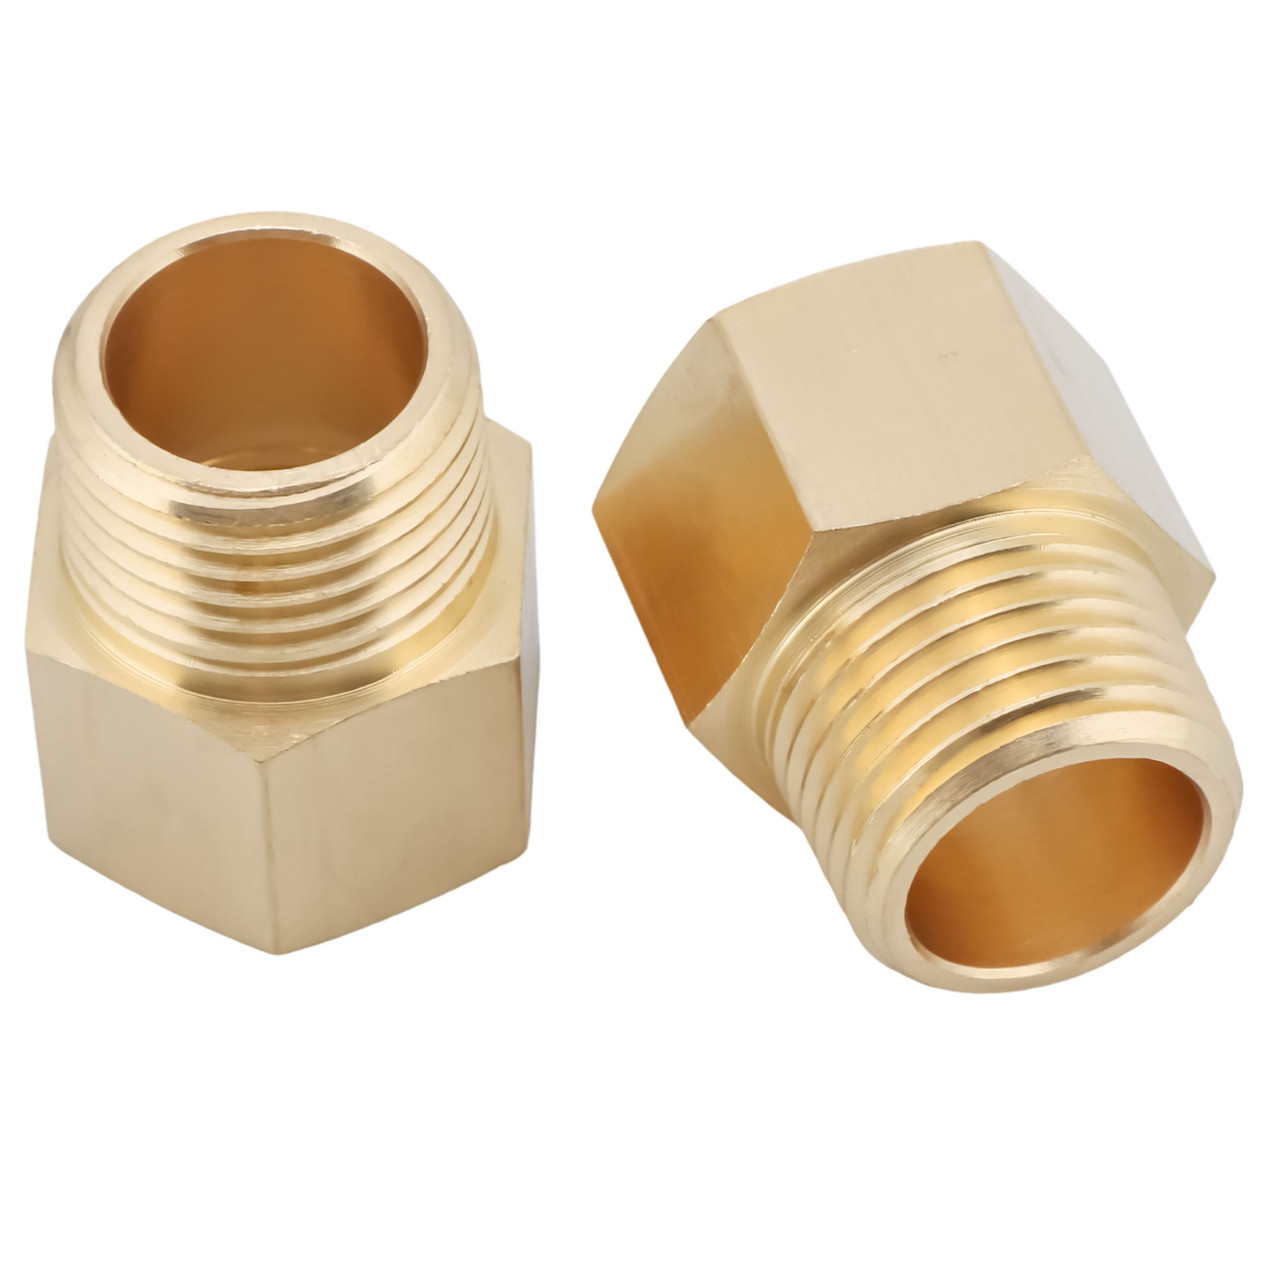 U.S. Solid 2pcs Brass Pipe Fitting Adapter, Male Pipe x Female Pipe, 1/2 x  1/